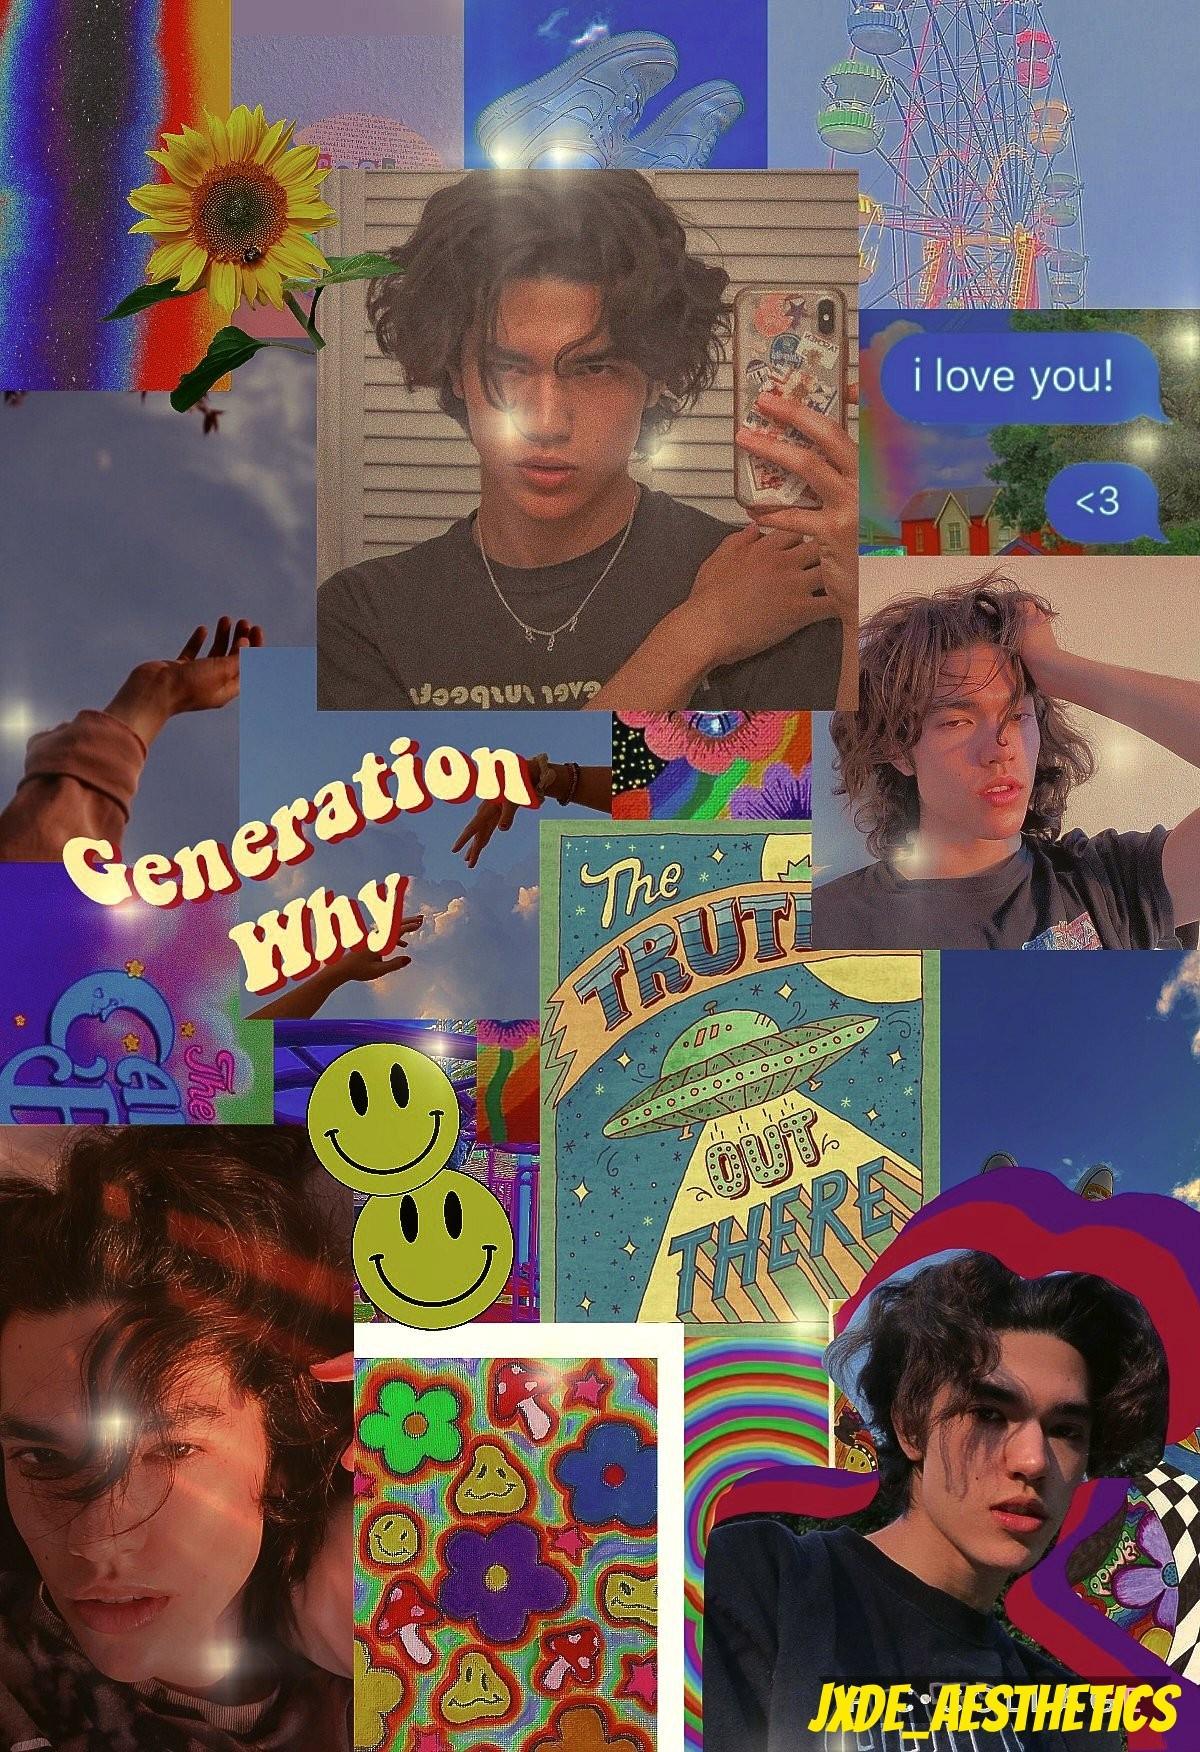 ✨tap🌻 Conan grayy!! hello you guys how are you guys hope u all r having an amazing day! so this is my fave Conan gray collage! okay qotd: what r u gonna do for the summer? im going to be swimming and talking to my friends! Okay have a great dayy!